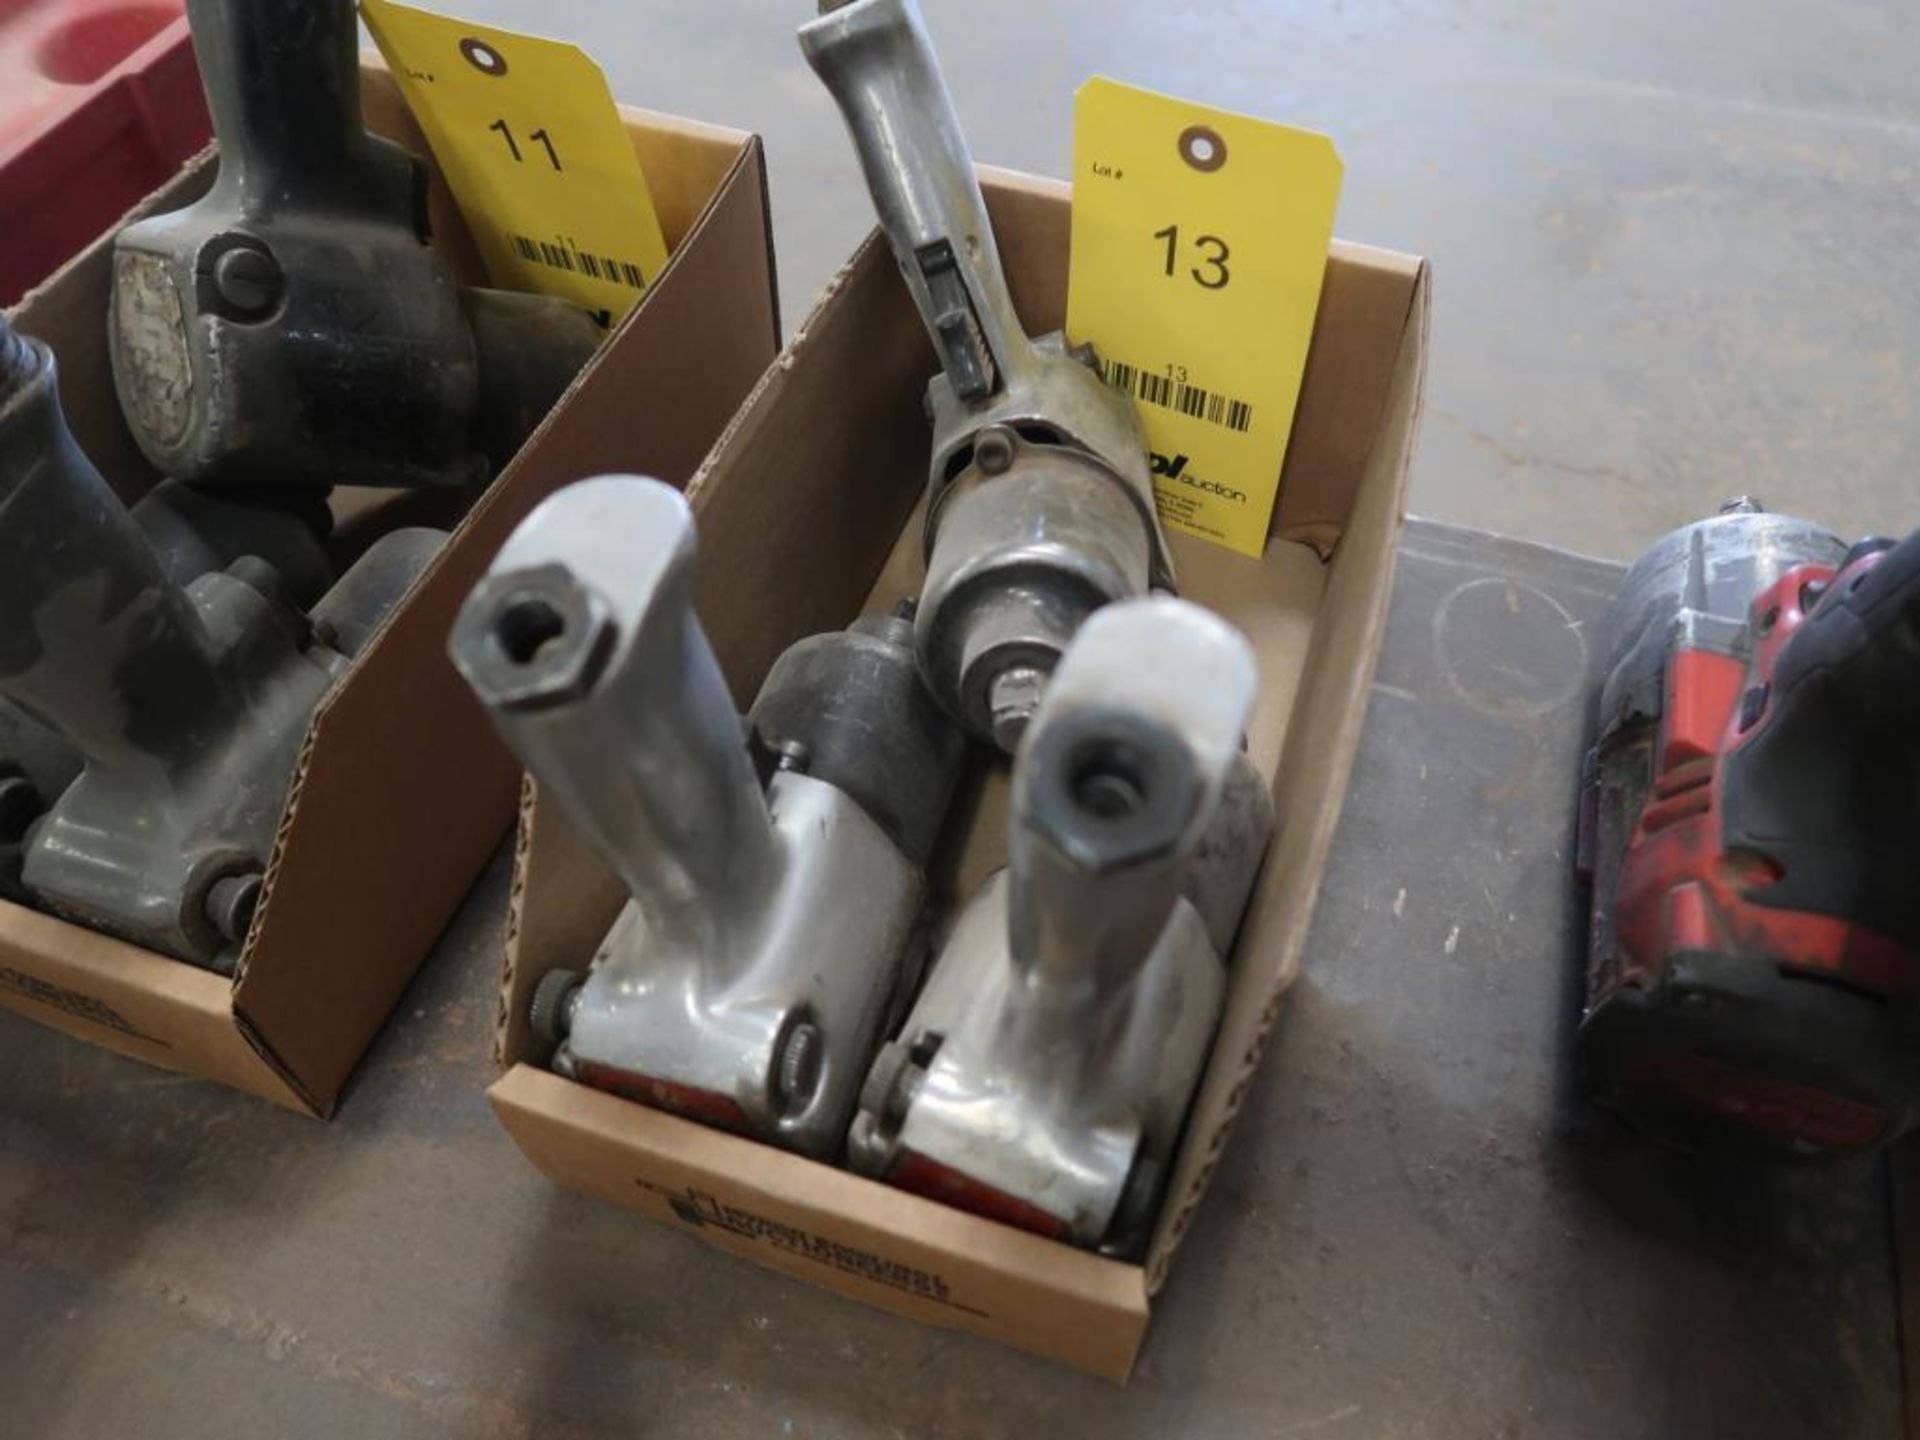 (3) 1/2 PNEUMATIC IMPACT WRENCHES